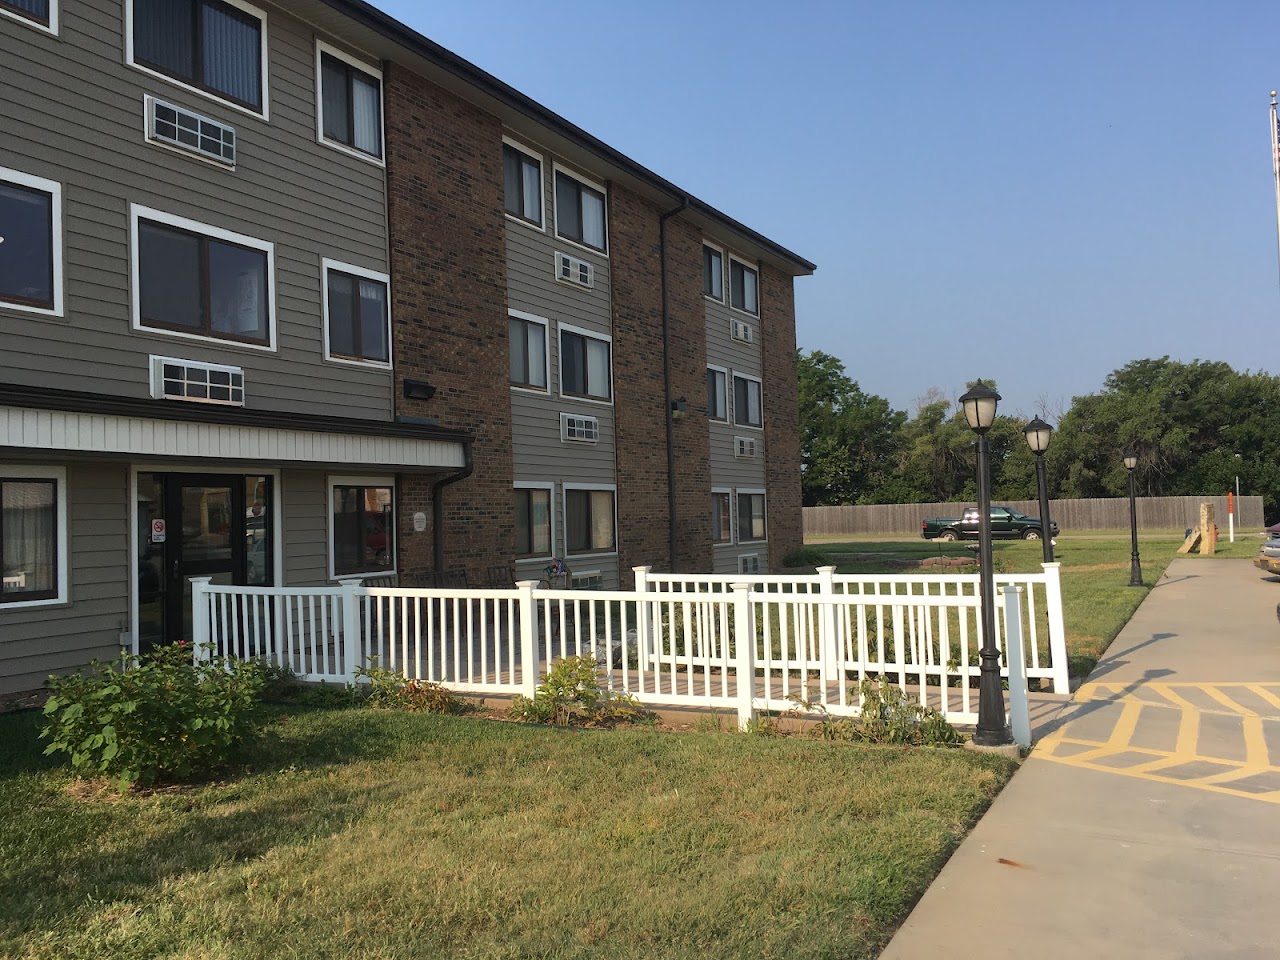 Photo of Lincoln Housing Authority at 107 E COURT LINCOLN, KS 67455